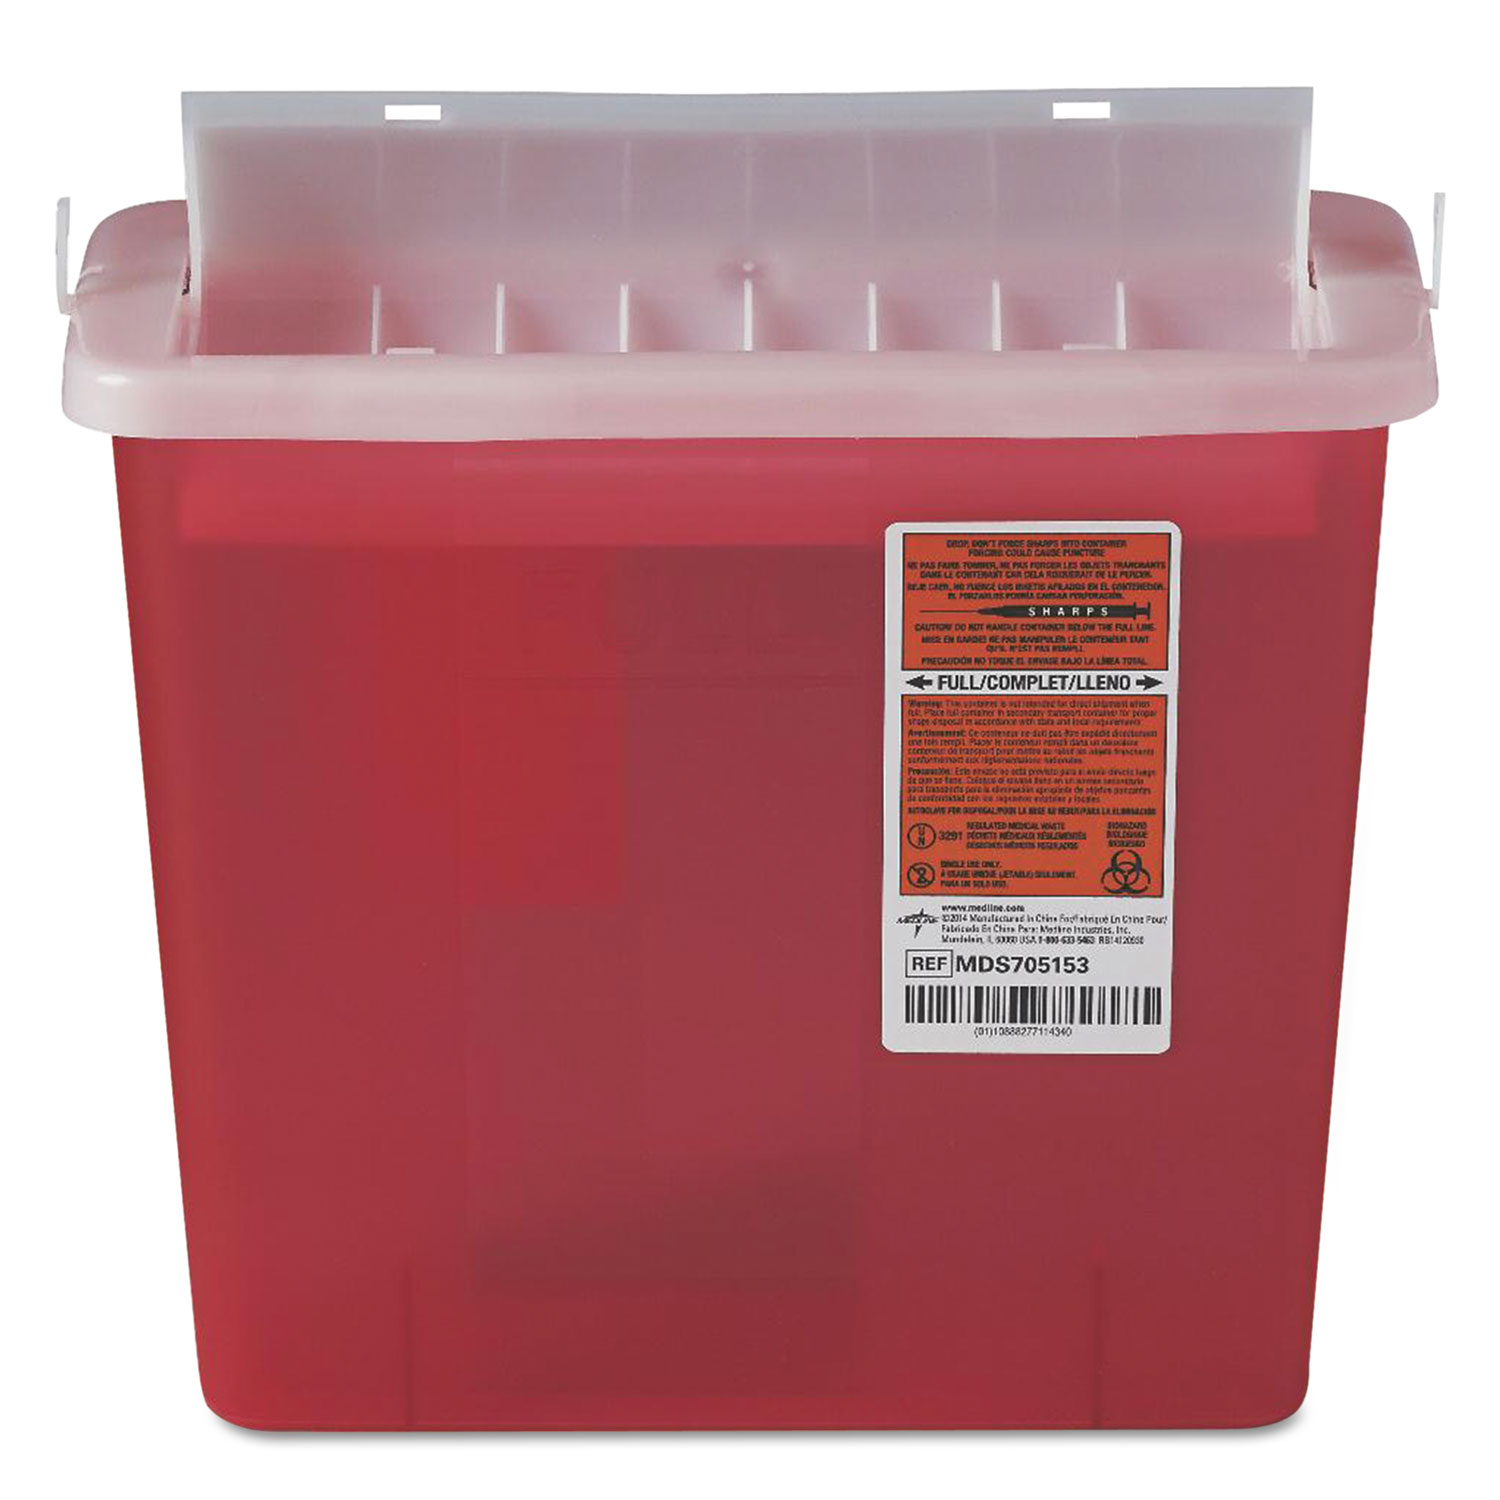 Sharps 5 qt Red Plastic Container for Patient Room